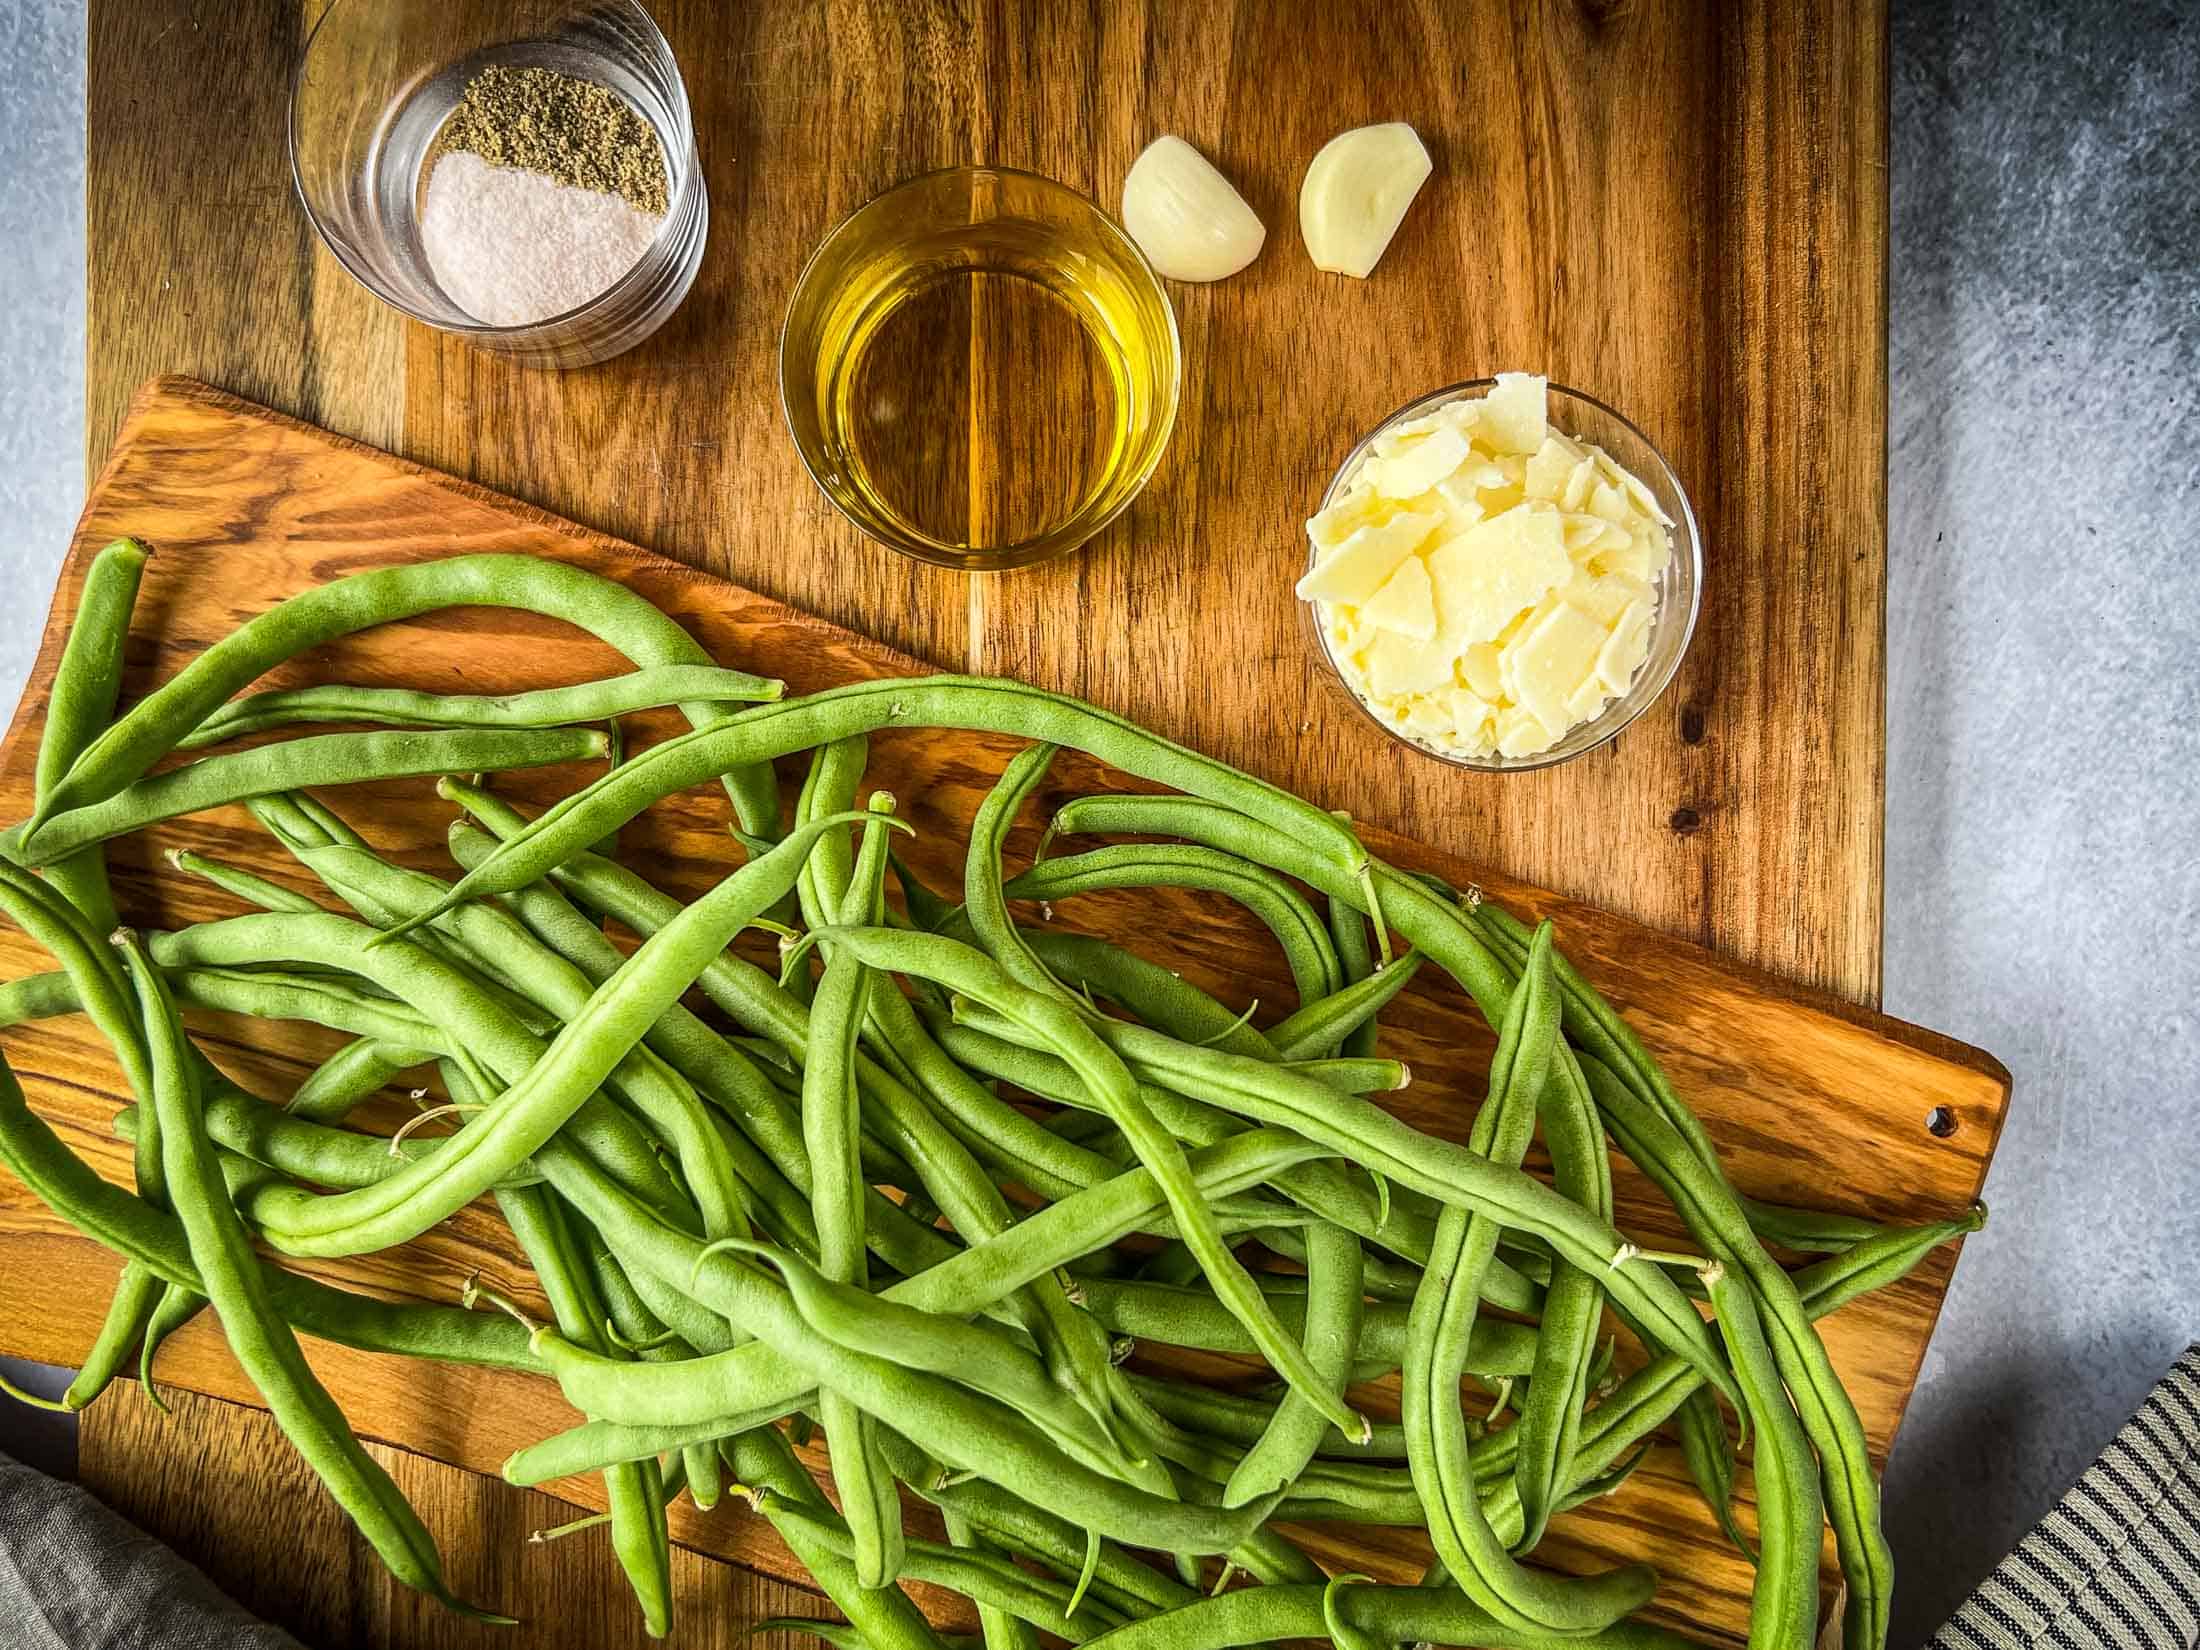 Key ingredients for smoked green beans including beans, parmesan, salt and pepper, two garlic cloves, and olive oil.